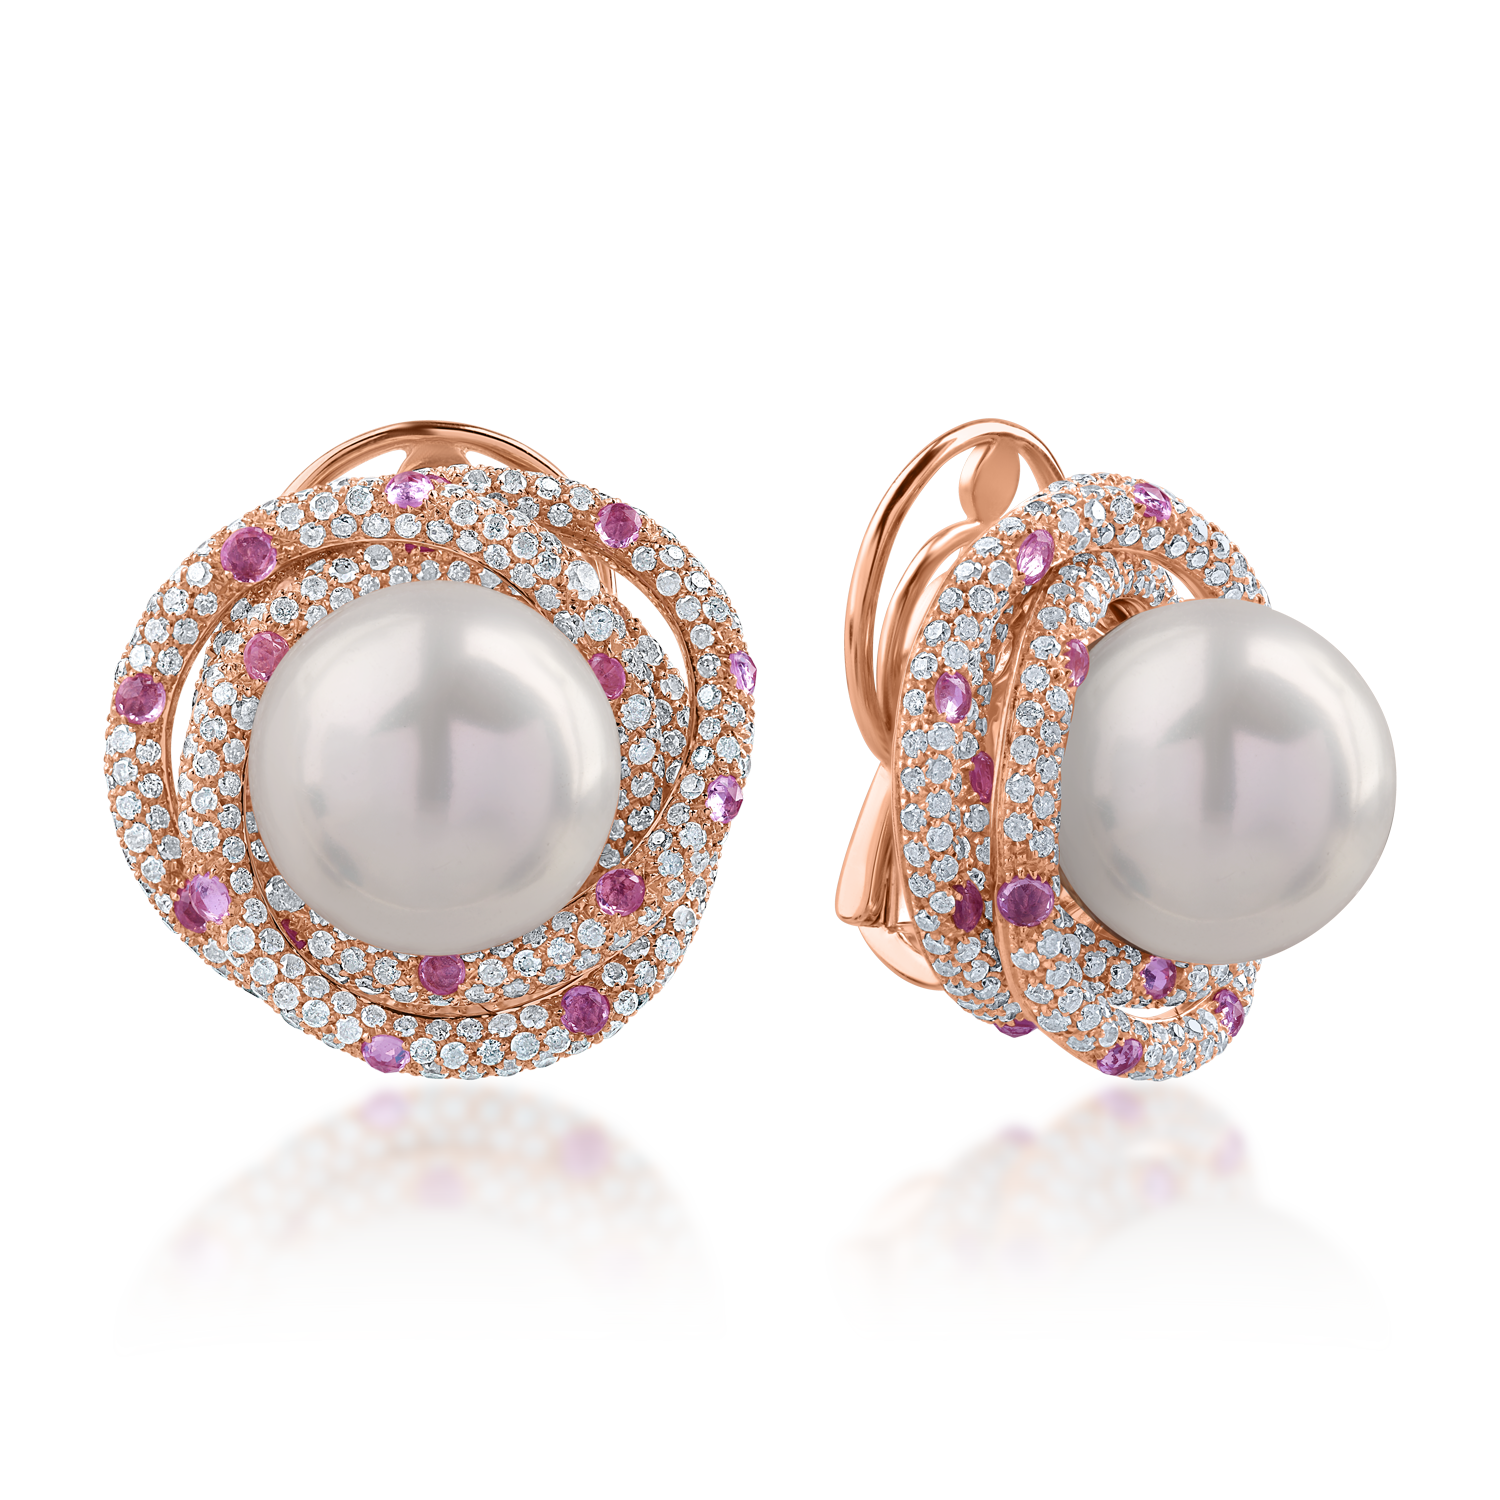 Rose gold earrings with 46.6ct fresh water pearls and 6.34ct precious stones